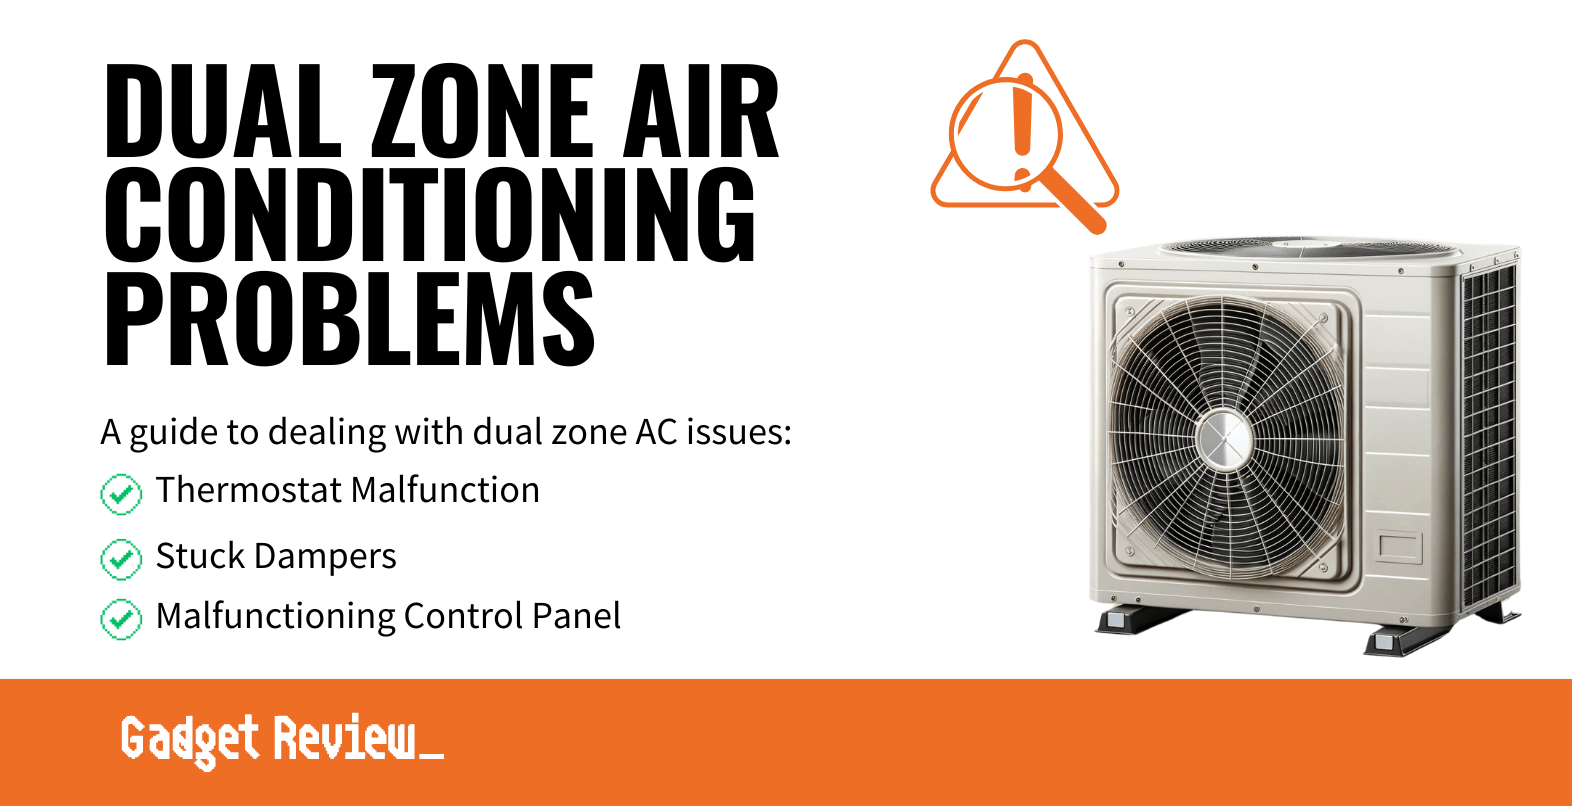 Dual Zone Air Conditioning Problems